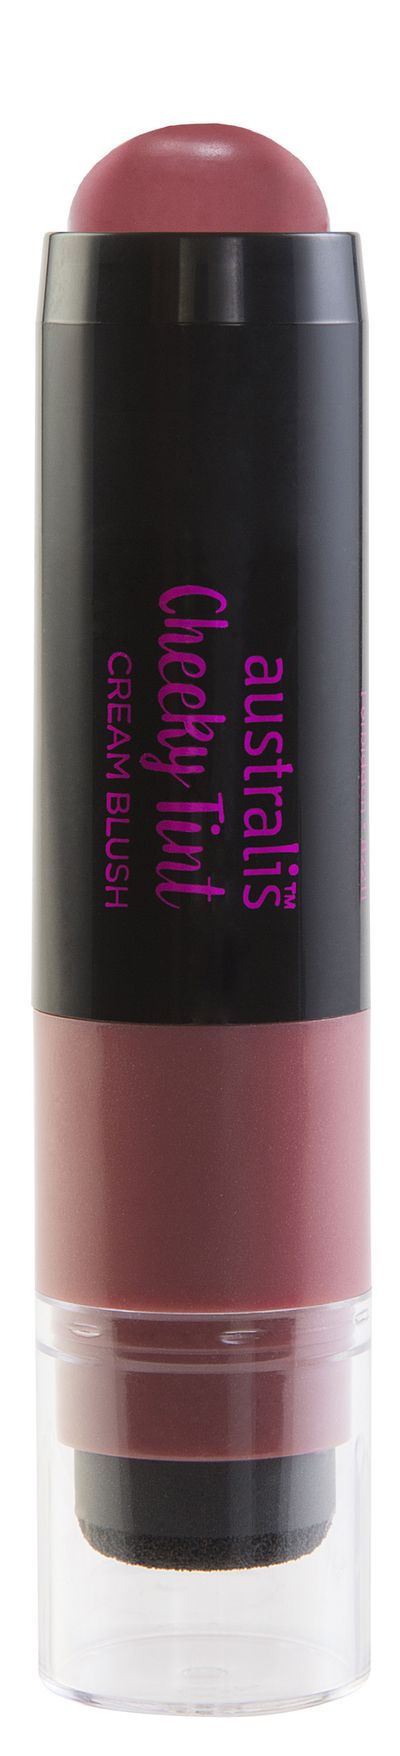 <a href="https://www.australiscosmetics.com.au/product/z-82208/cheeky-tint" target="_blank">Australis Cheeky Tint Cream Blush, $18.95.</a><br />
An easy-to-apply cream blush that
offers buildable colour and a natural glow.